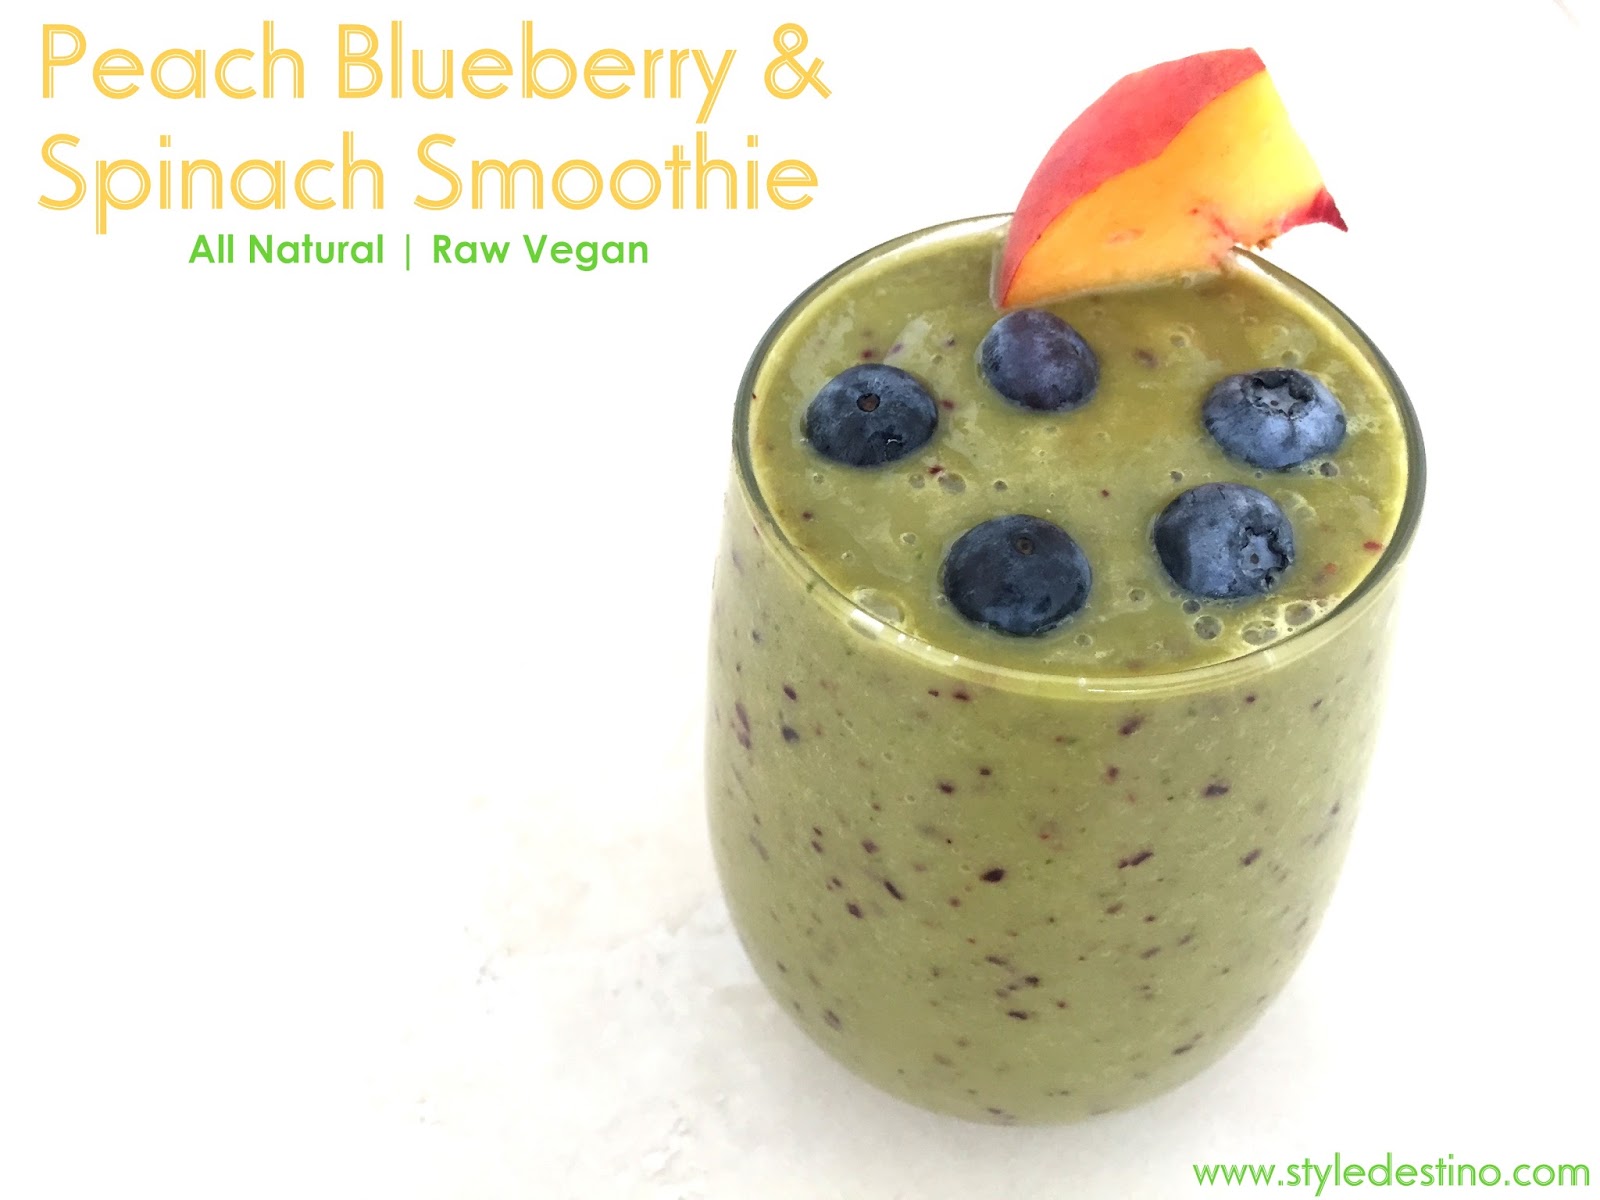 Peach Blueberry and Spinach Smoothie - Raw Vegan - Smoothie Recipe - Healthy Living - LOSE WEIGHT - Best Smoothie Recipe